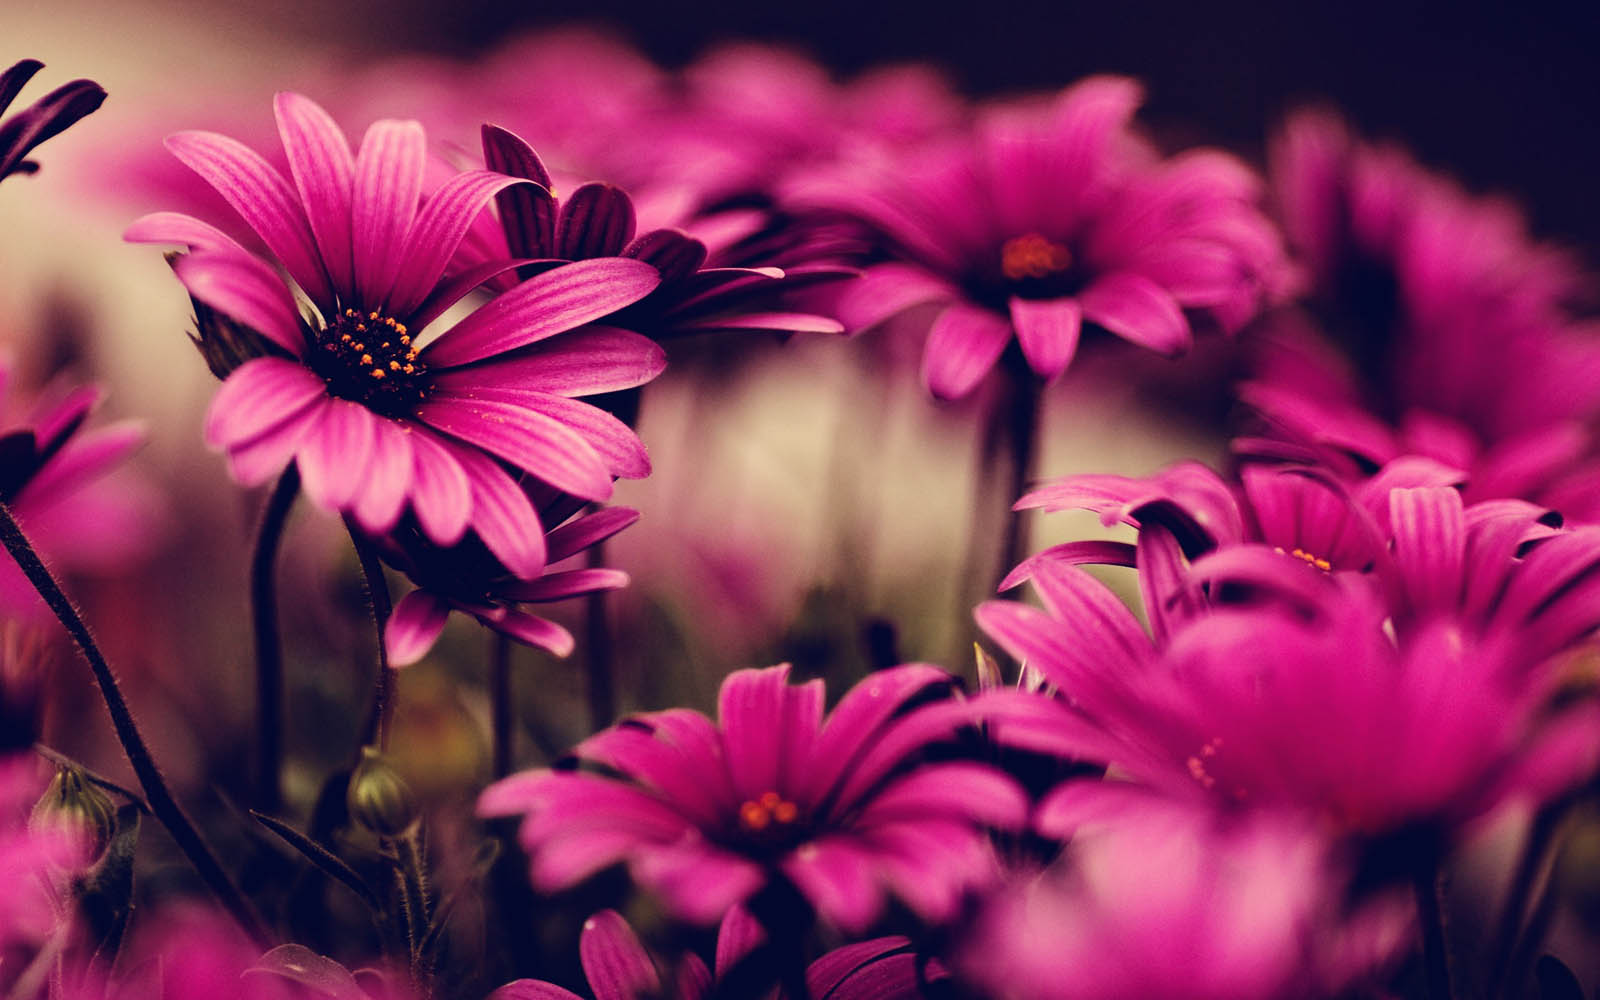 Tag Pink Flowers Wallpapers BackgroundsPhotos Images and Pictures